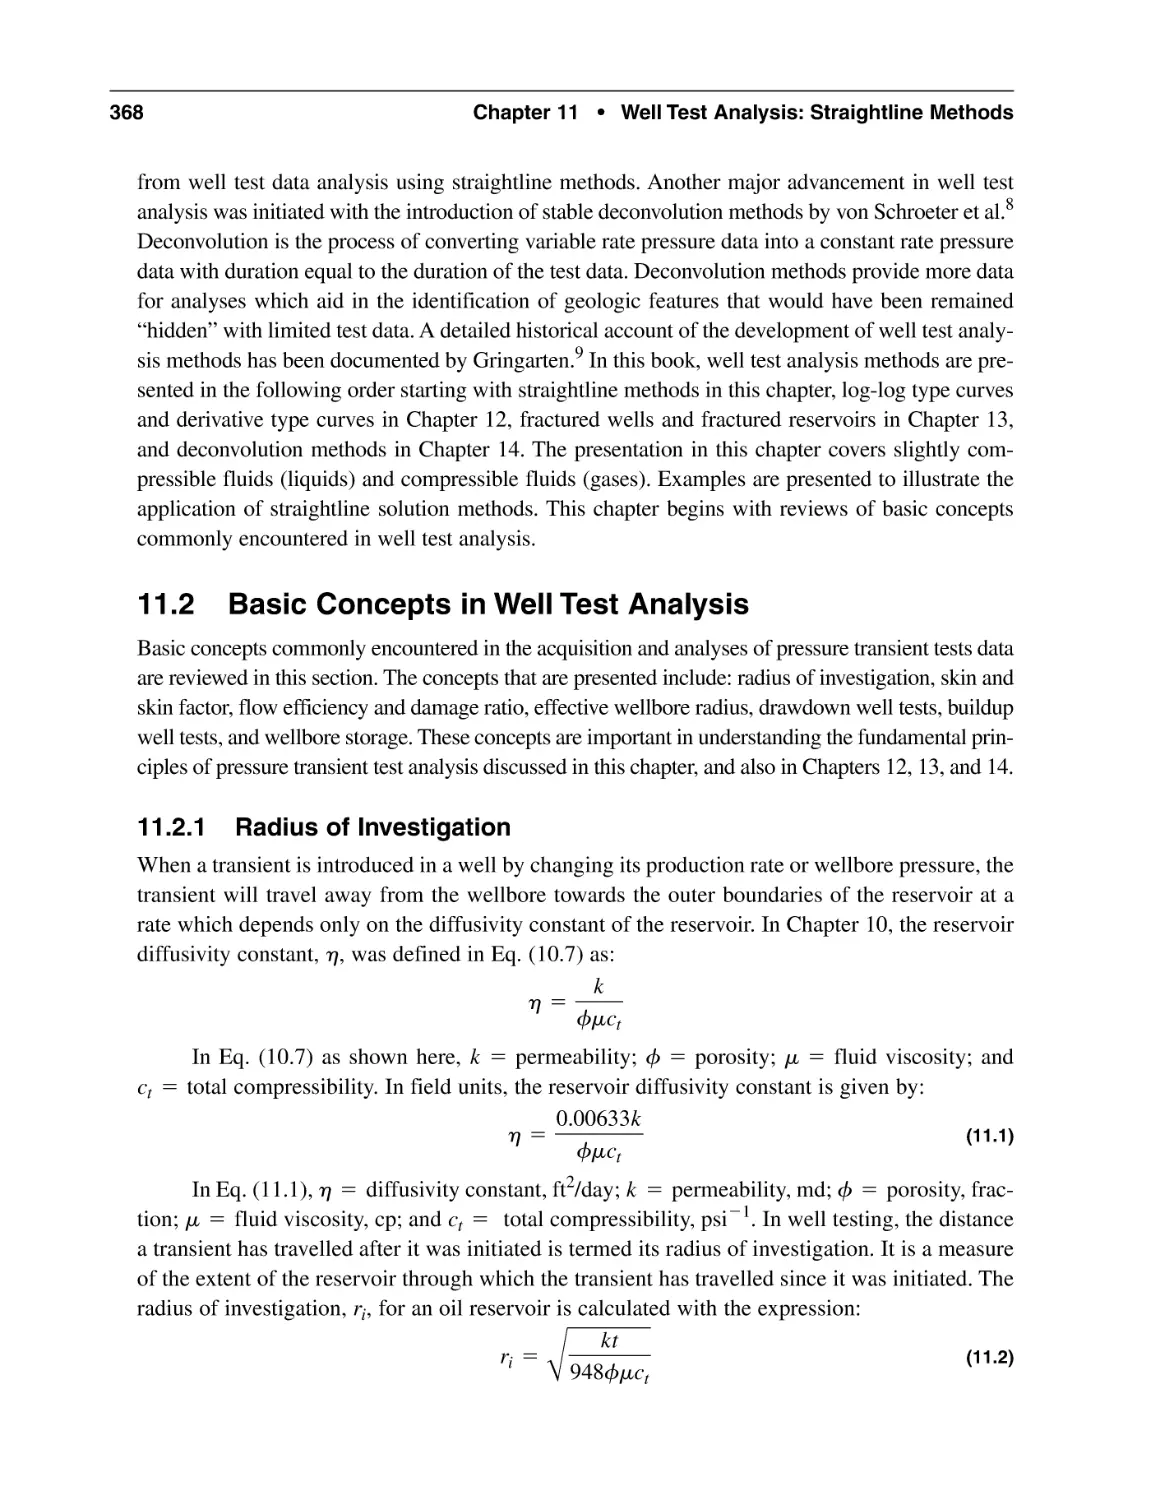 11.2 Basic Concepts in Well Test Analysis
11.2.1 Radius of Investigation